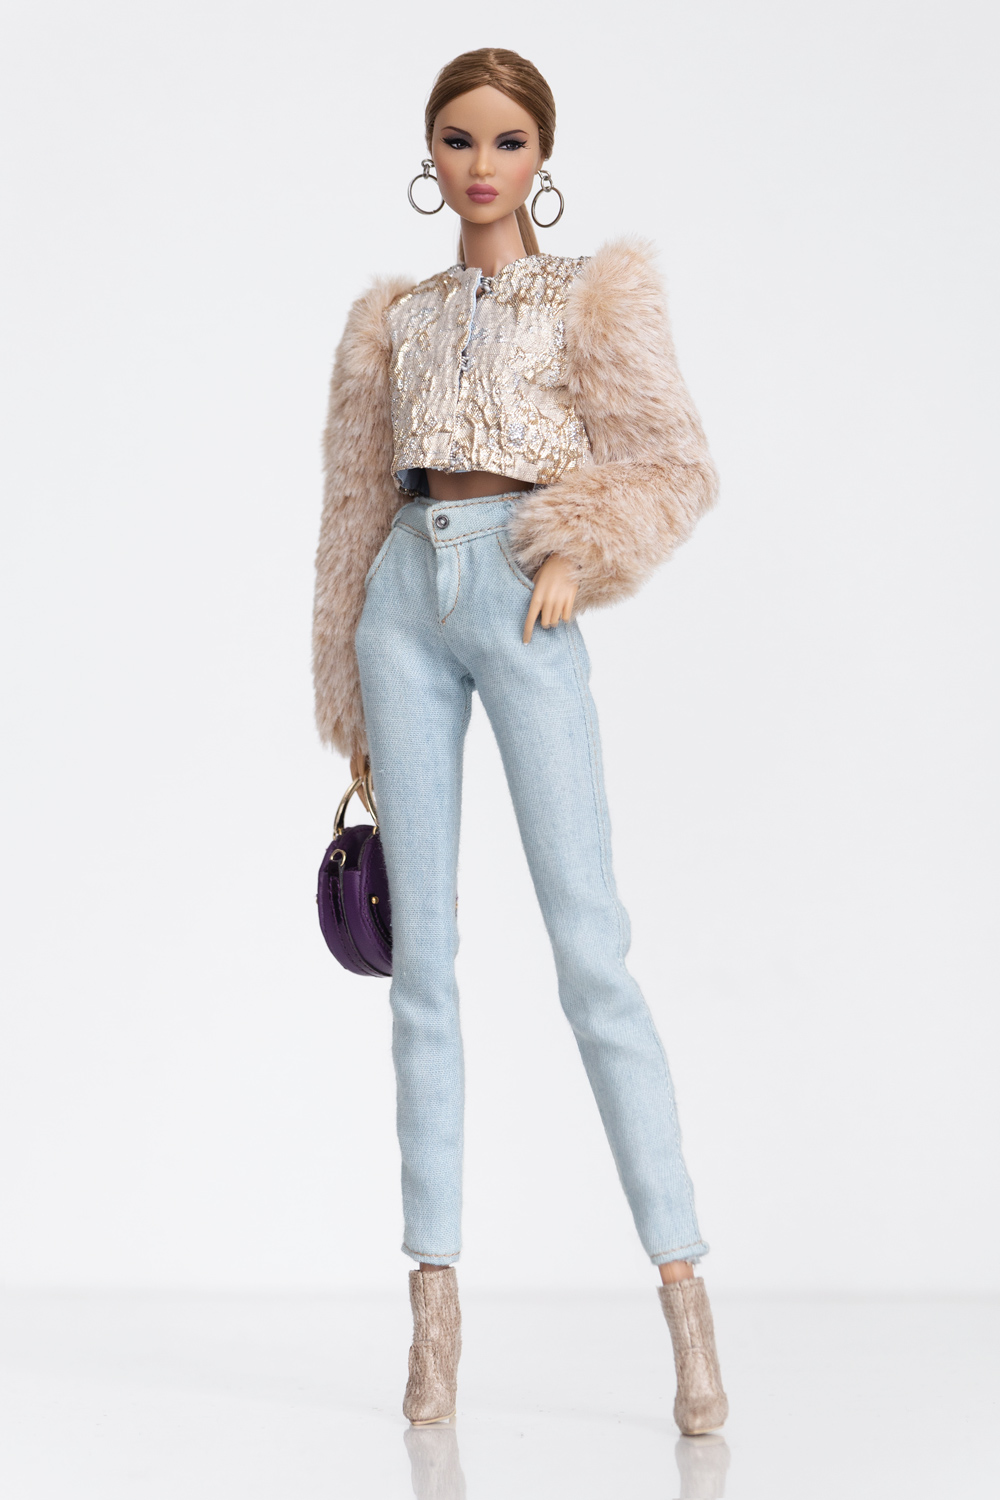 {Oversized Cropped Jacket}
Brocade in light gold and silver.
With light brown fur sleeves.